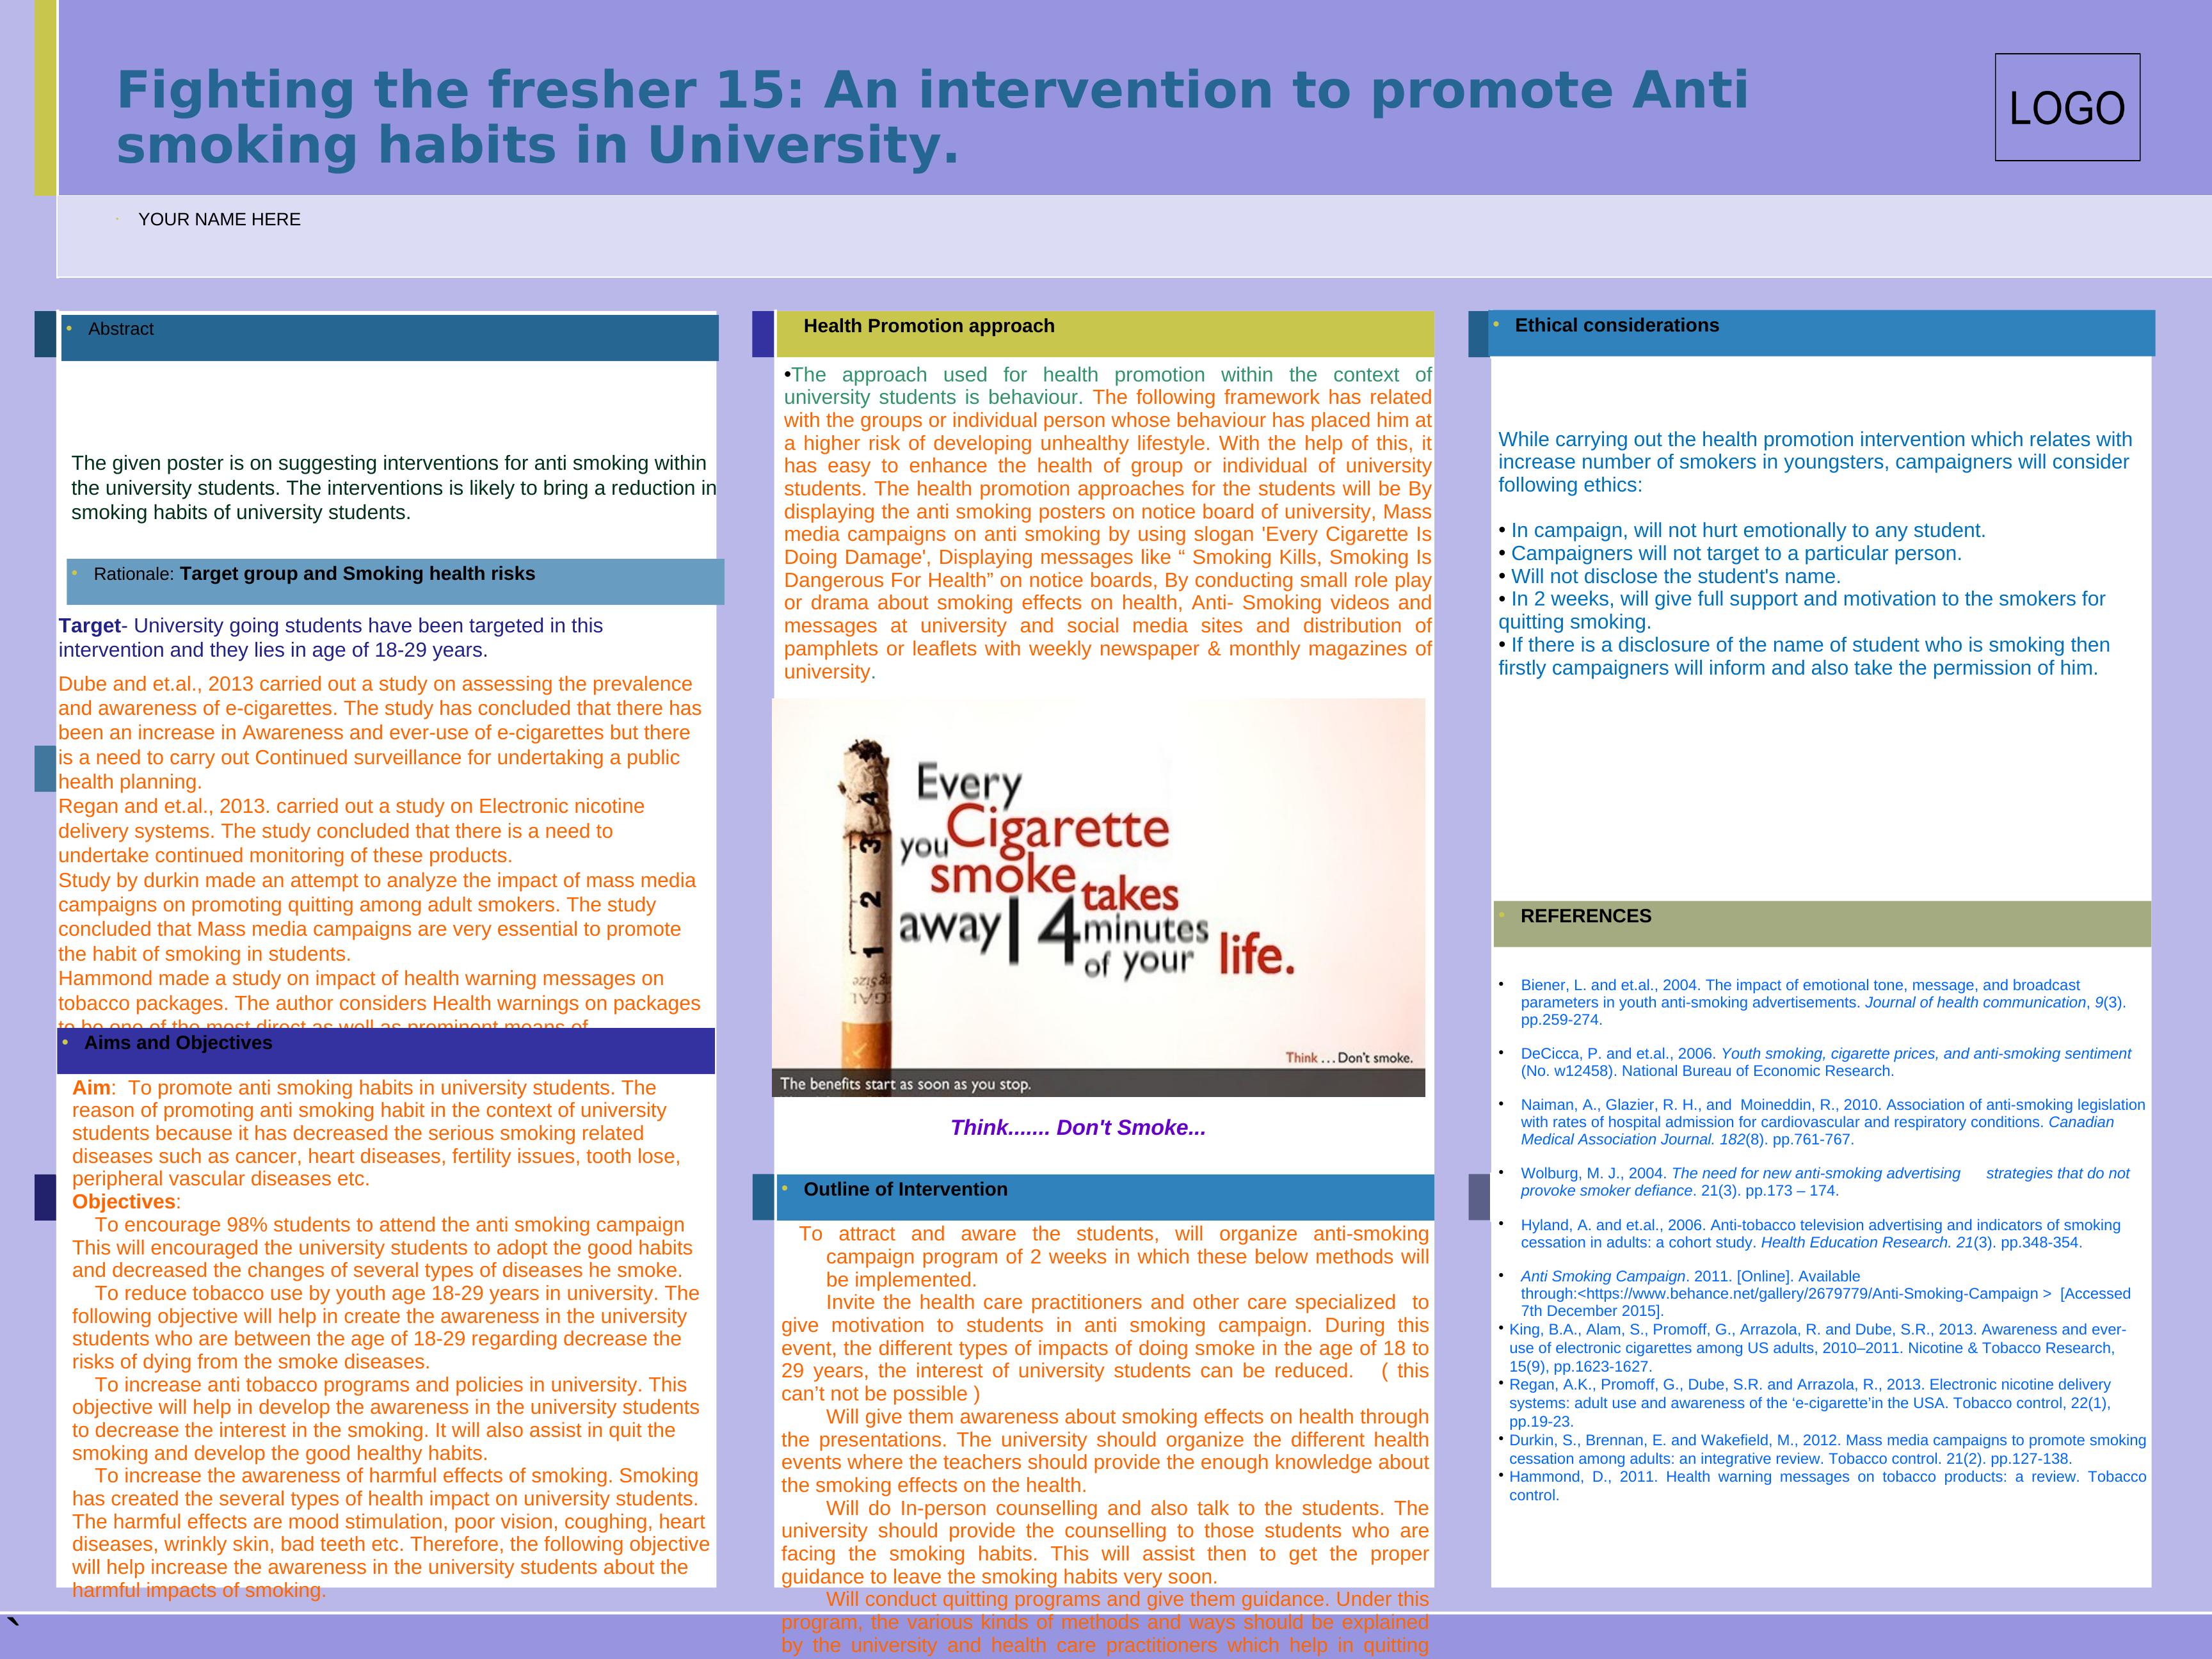 Interventions for Anti-Smoking Habits in University Students_1